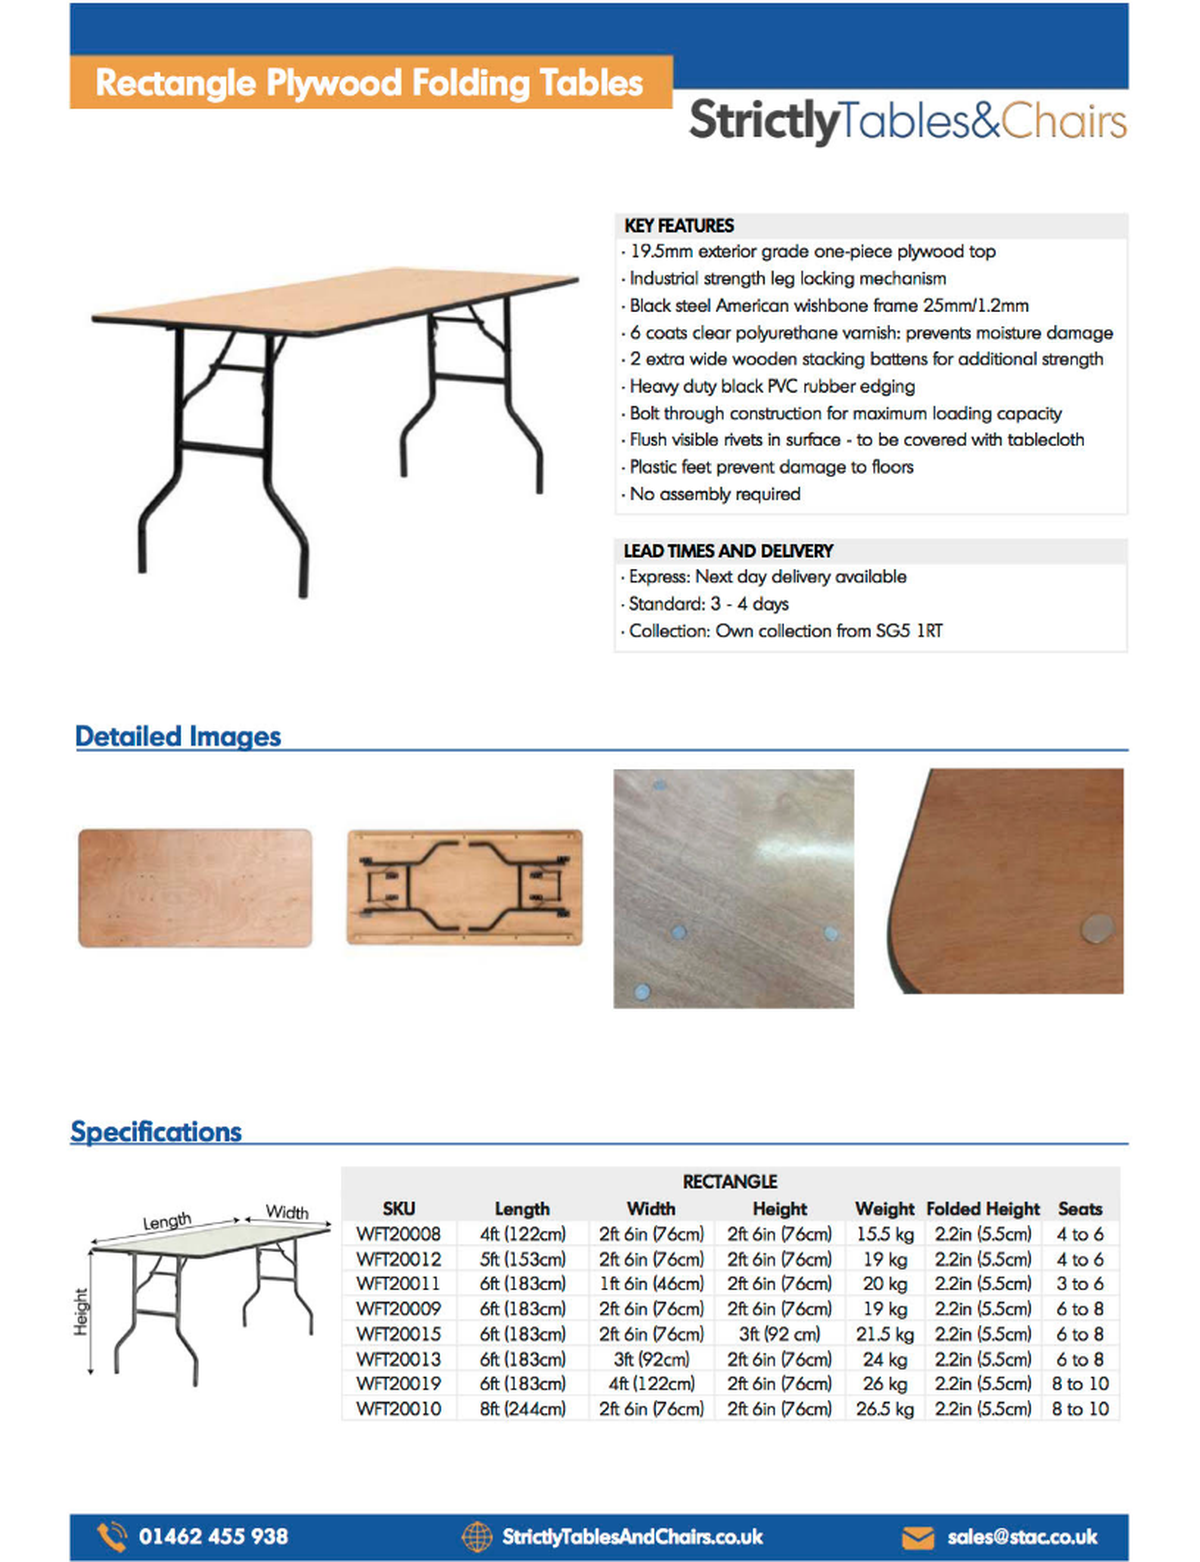 Strictly Tables And Chairs Bar Height Rectangular Plywood Table 6ft X 2ft 6in 183cm X 76cm Picnic Tables